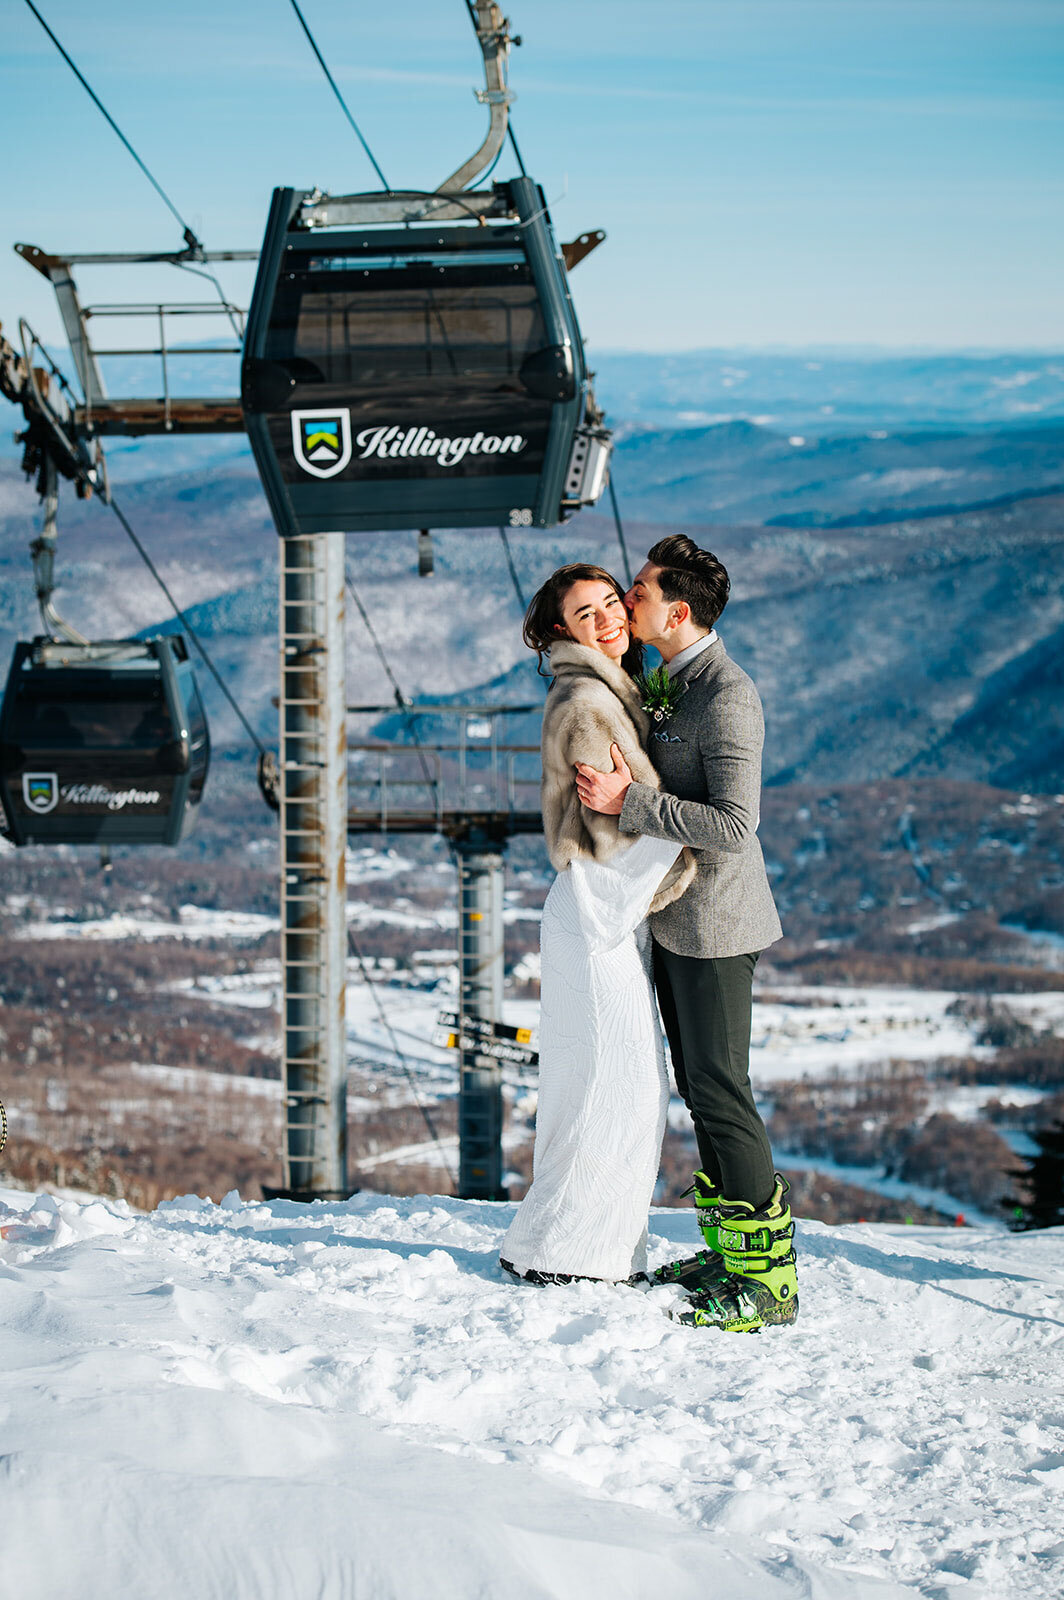 couple on skis in front of gondola chair lift at winter wedding in killington vermont